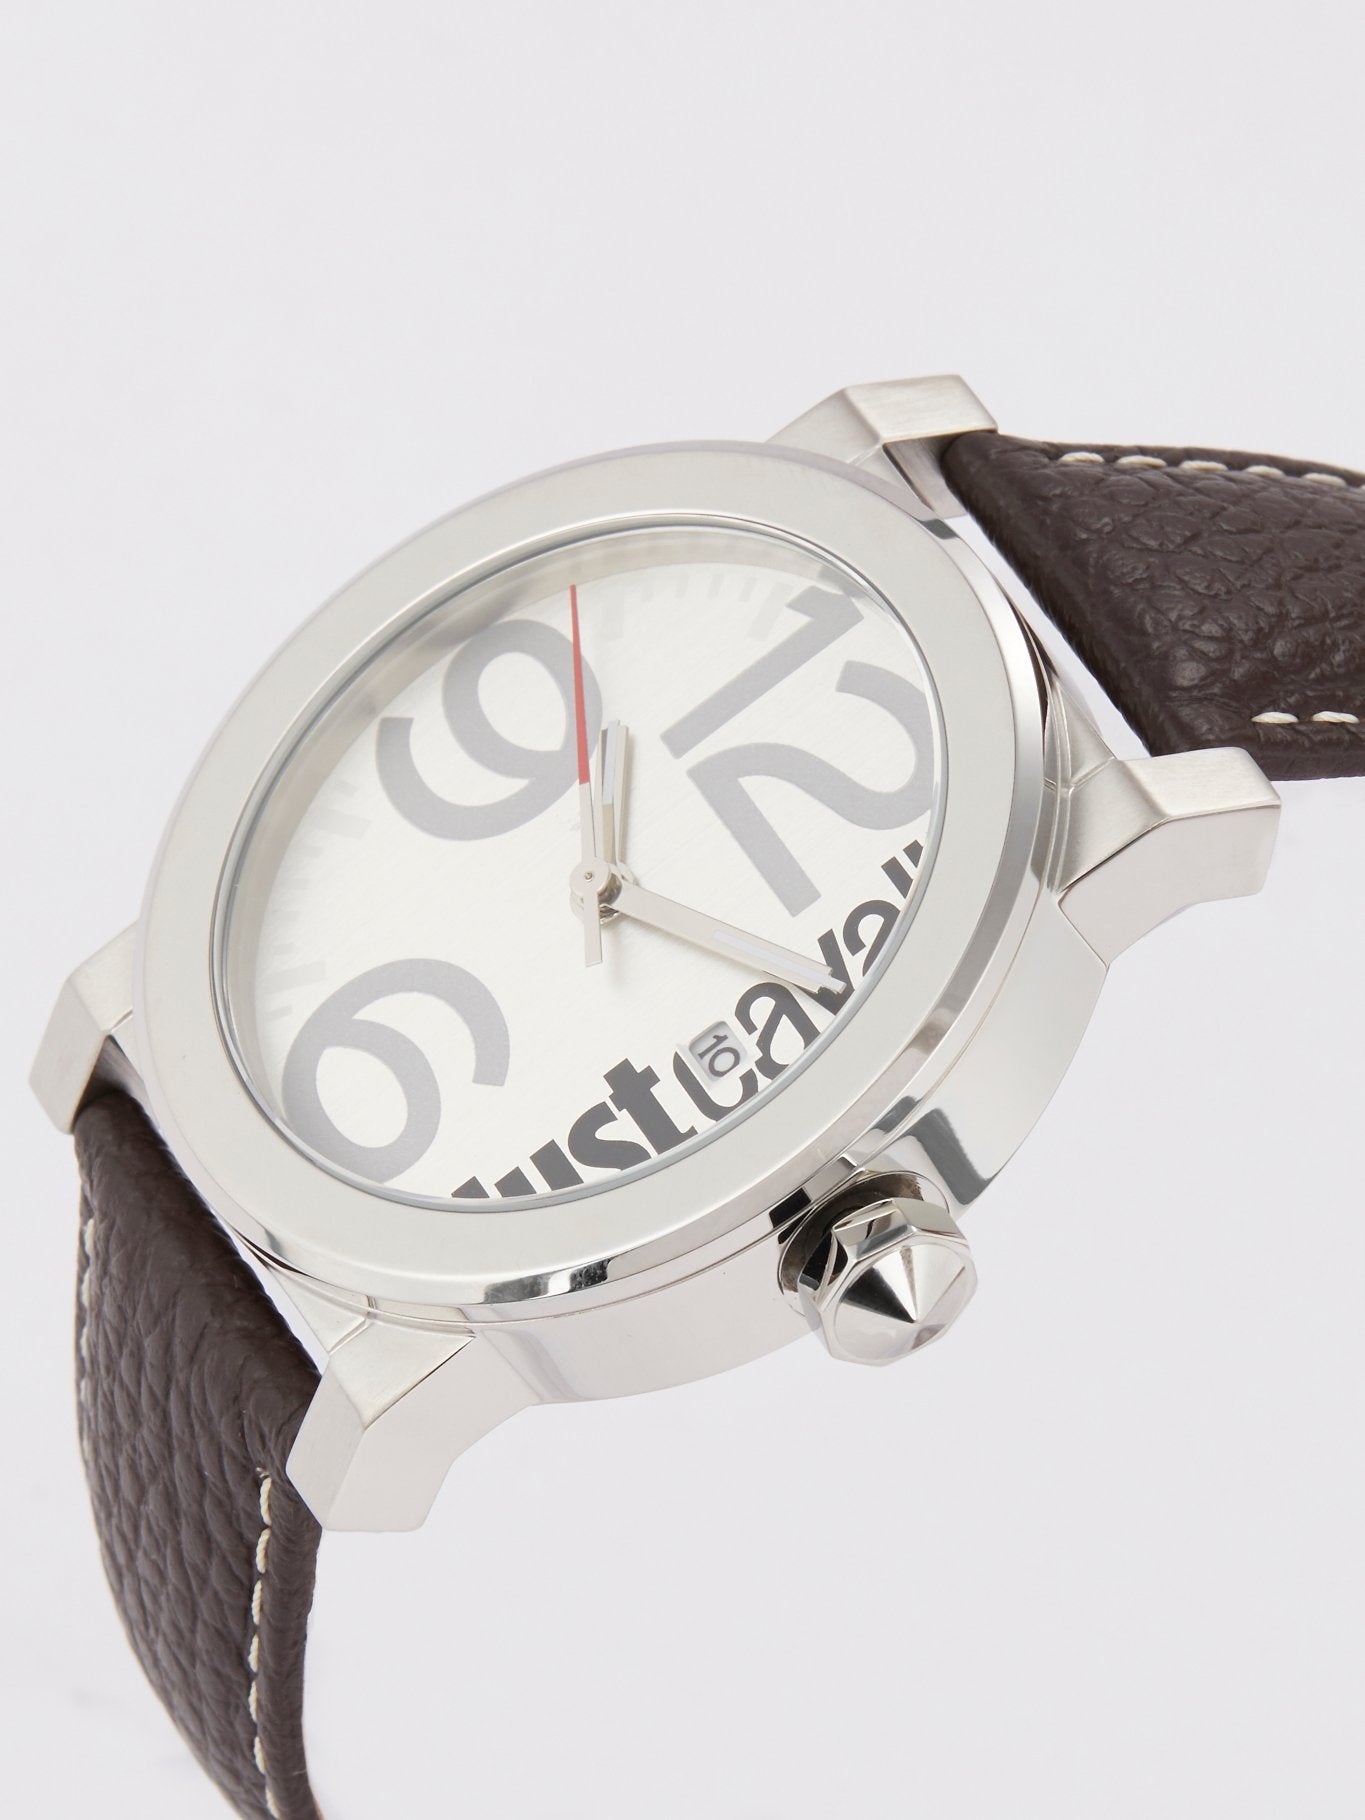 White Dial with Brown Leather Strap Logo Watch